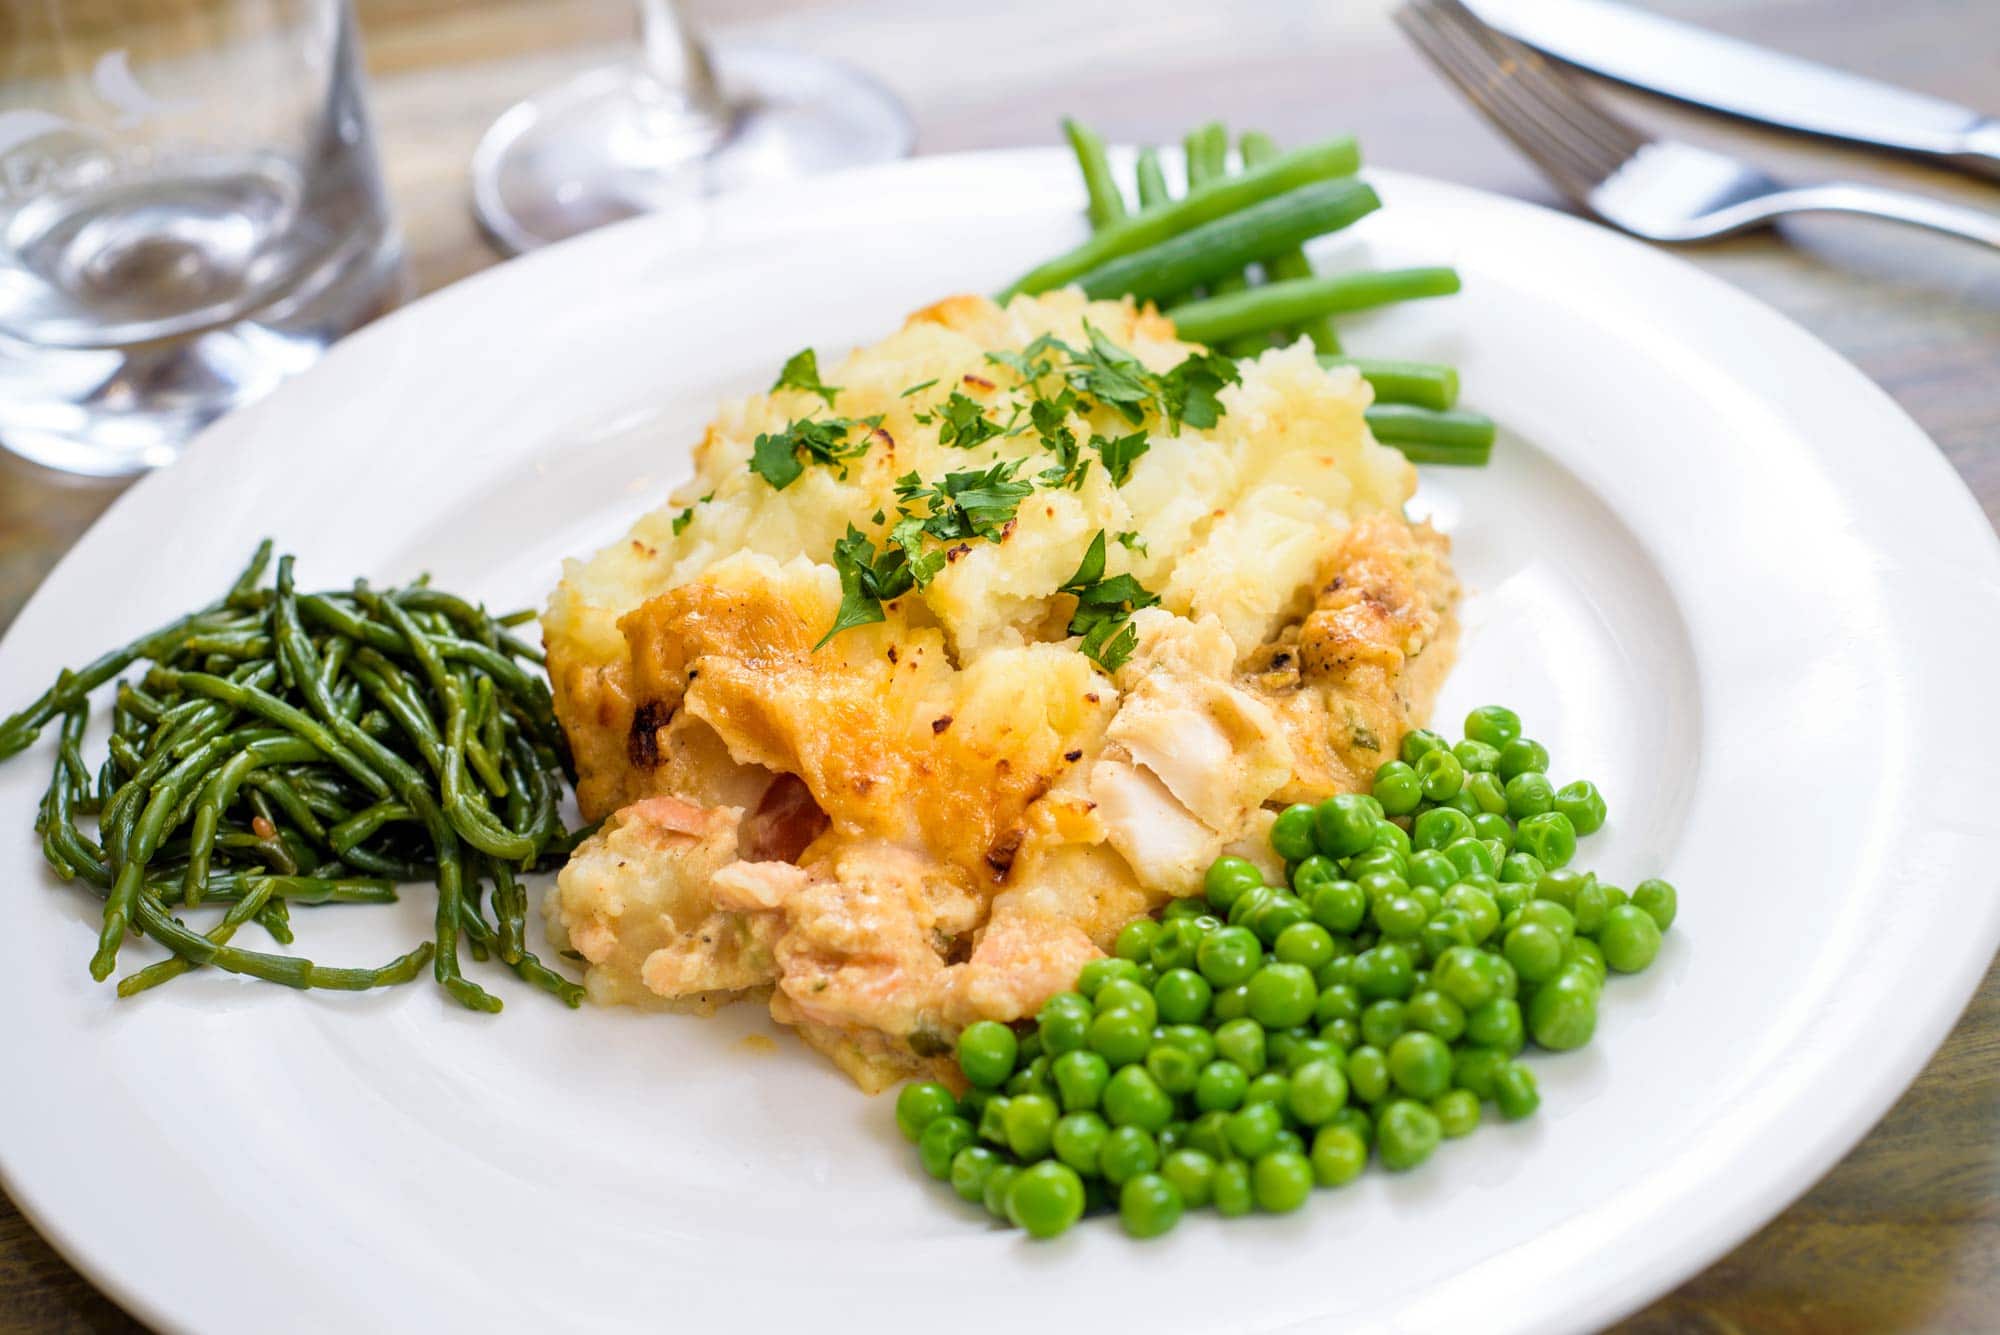 Fish pie served with vegetables on a white plate